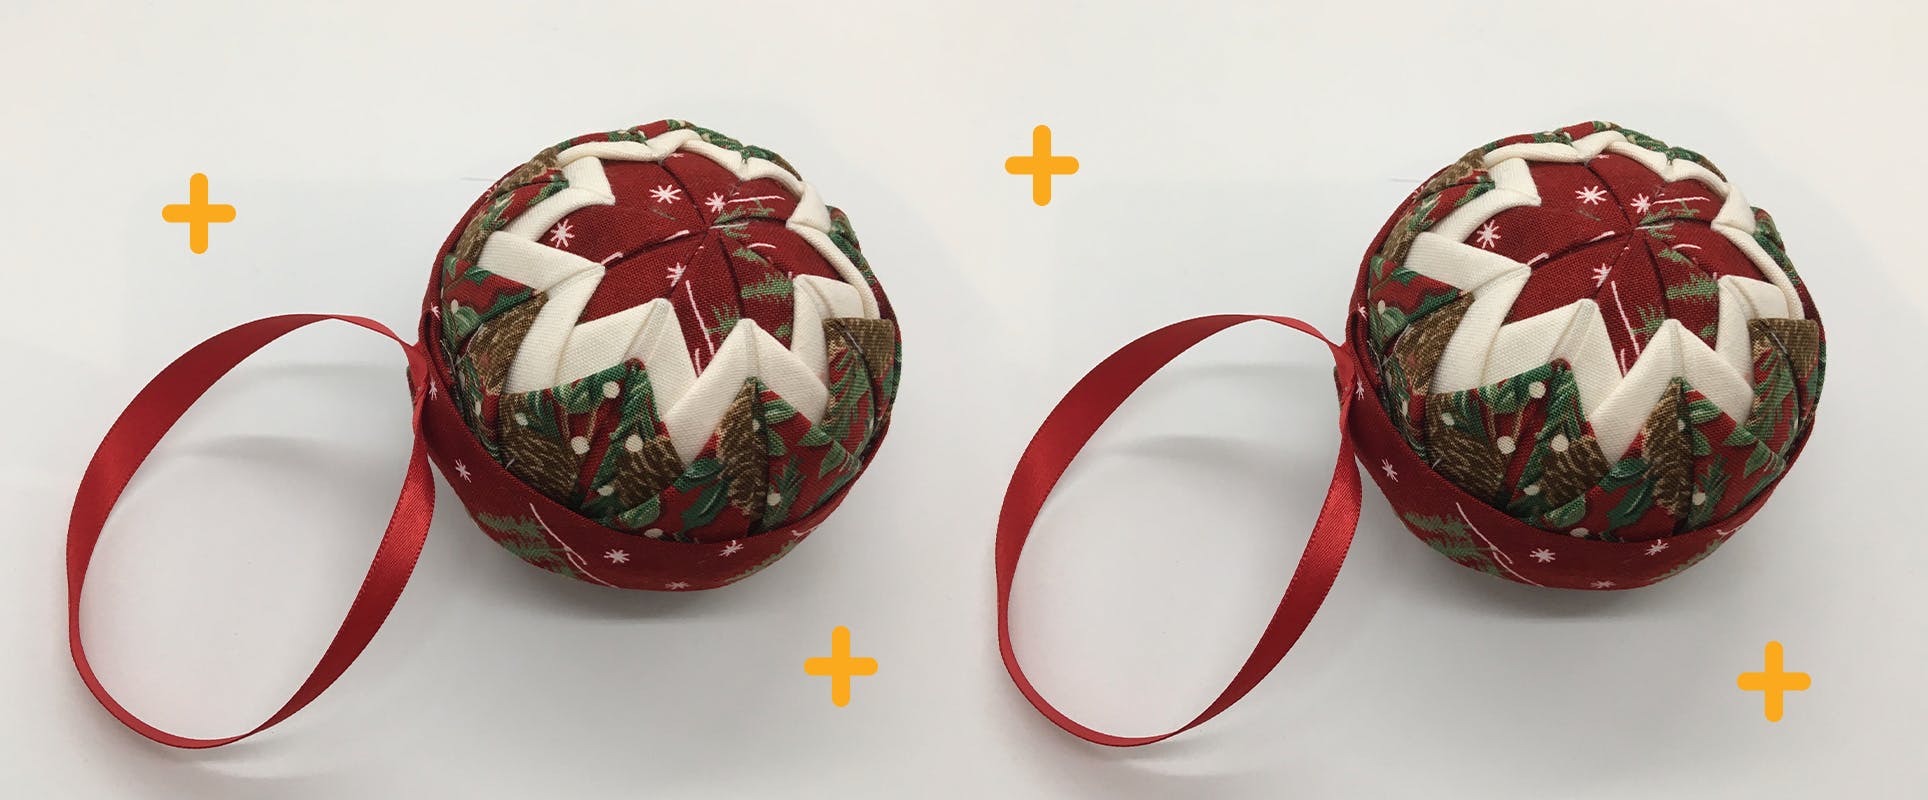 Quilted Christmas ball ornament - free tutorial!